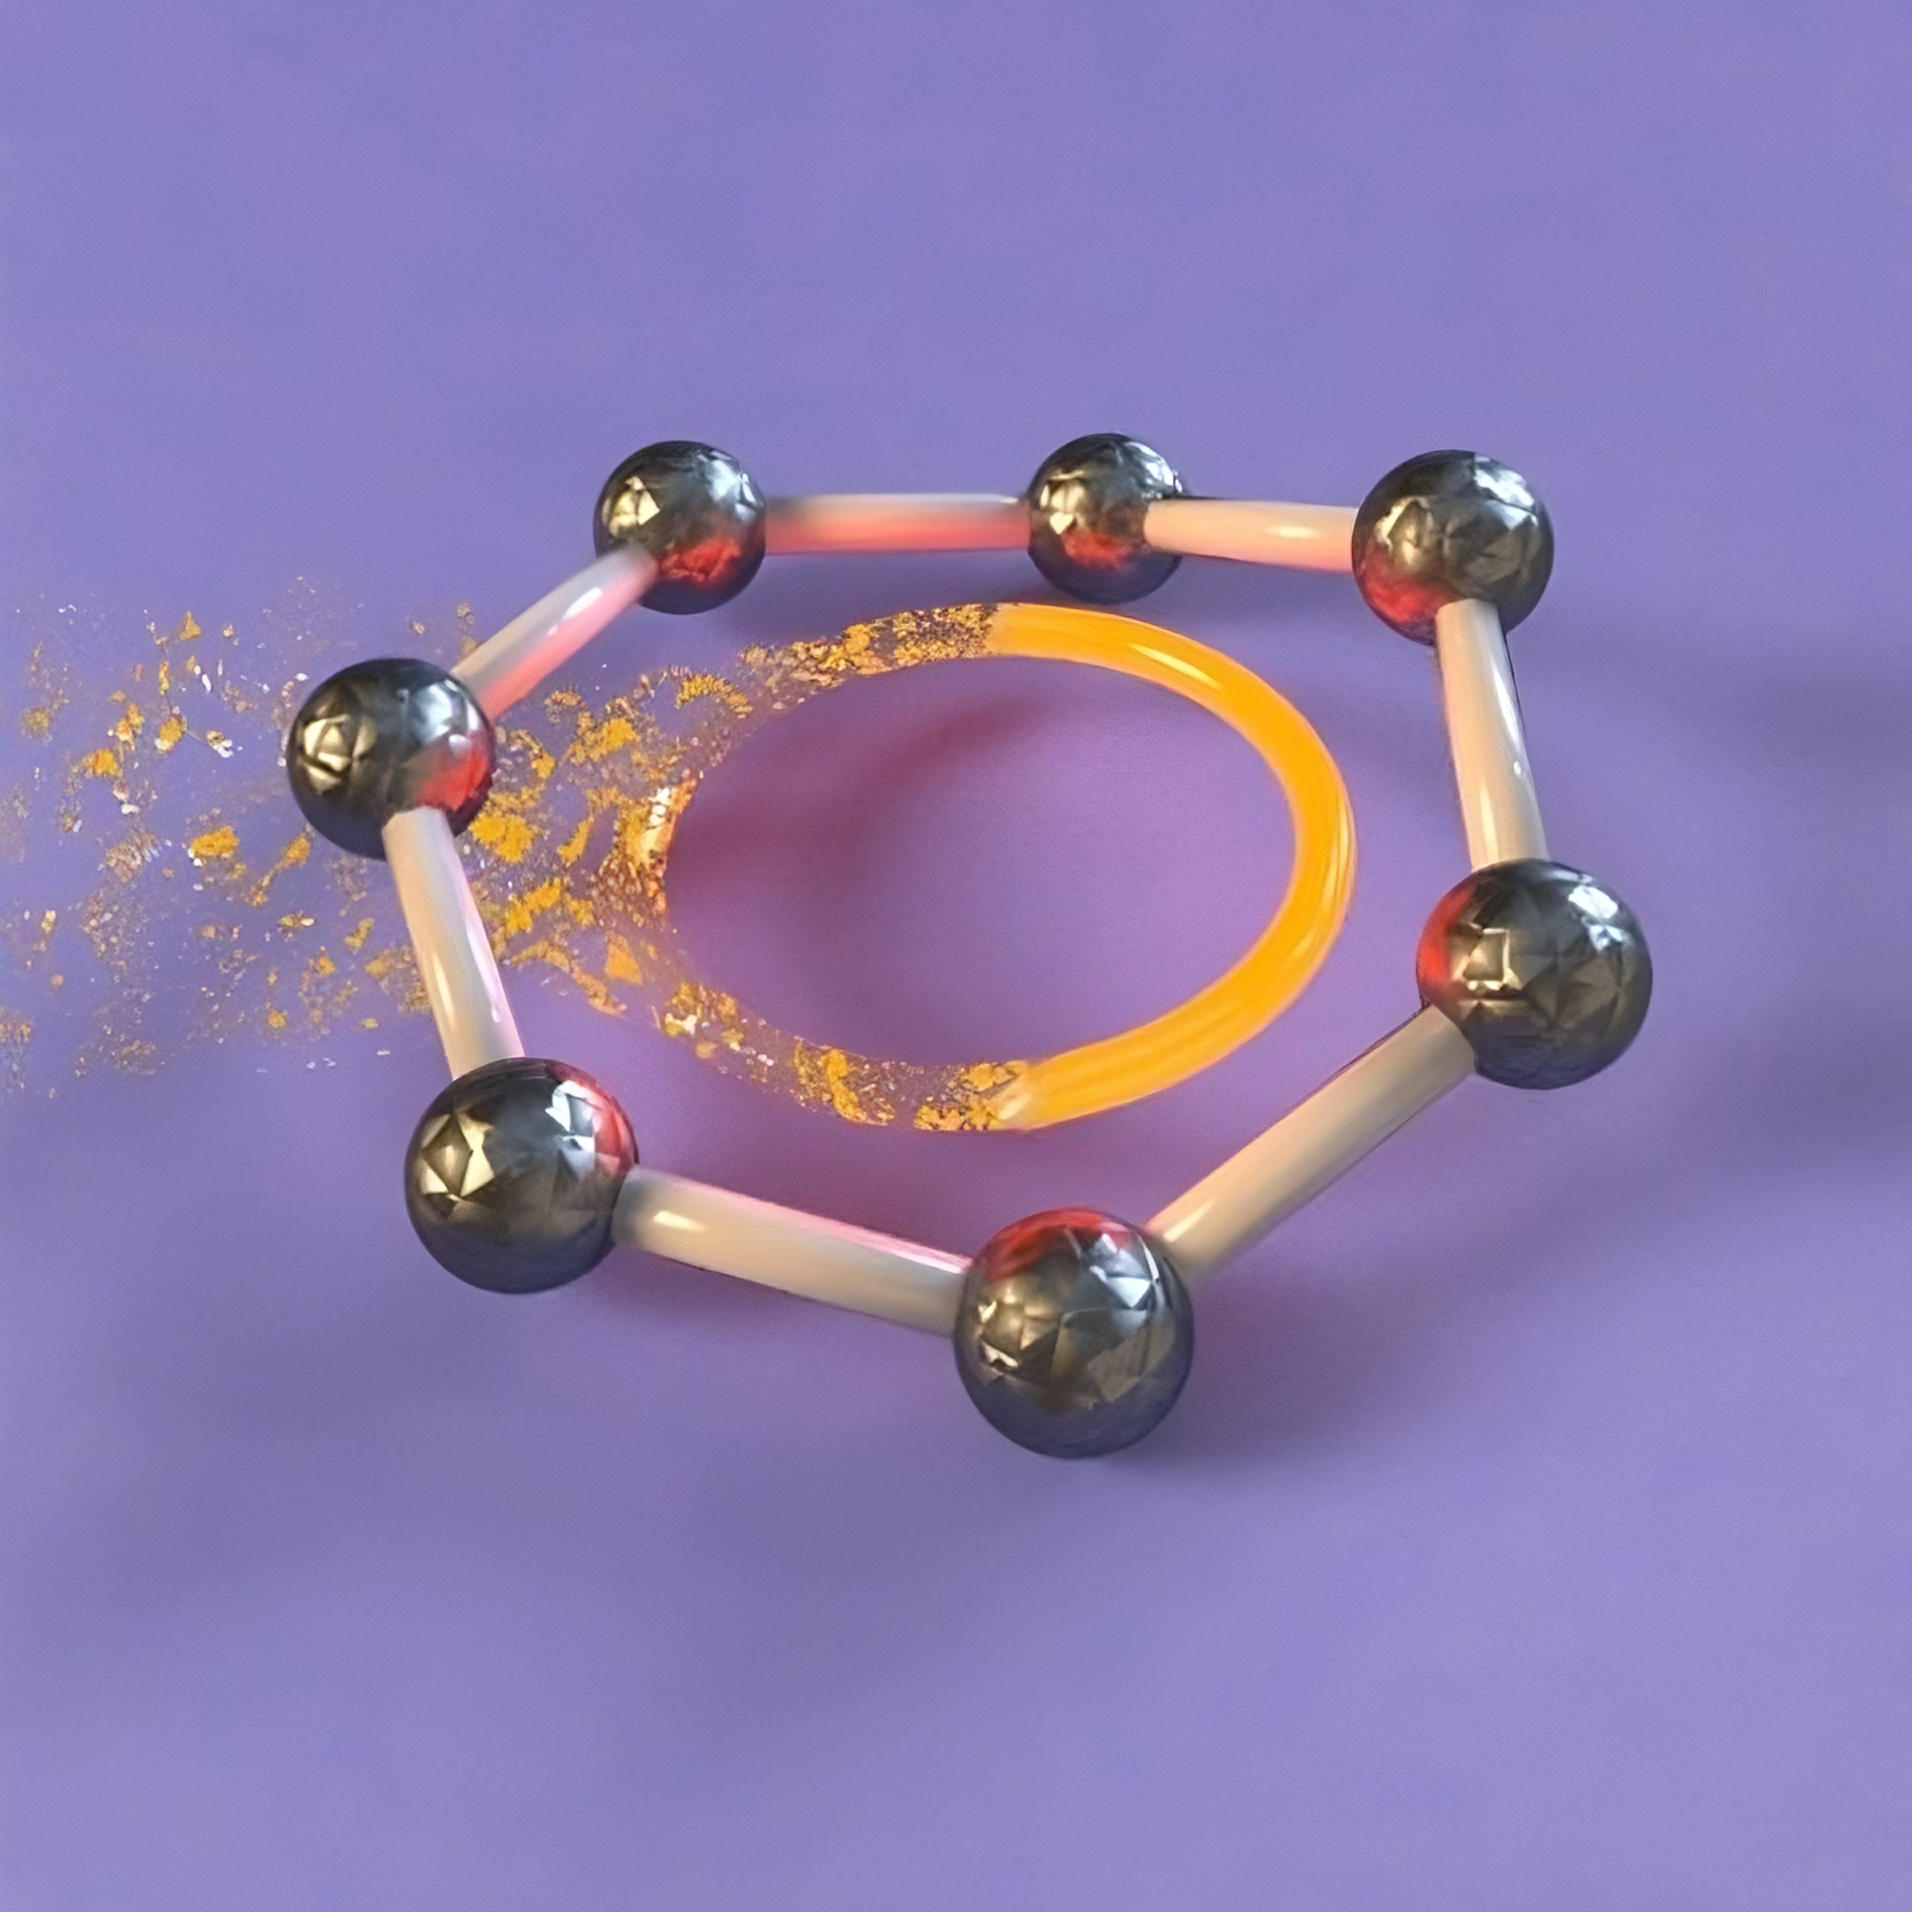 A team of researchers from Durham University and the University of York has twisted molecules to their limits in order to challenge understanding of c